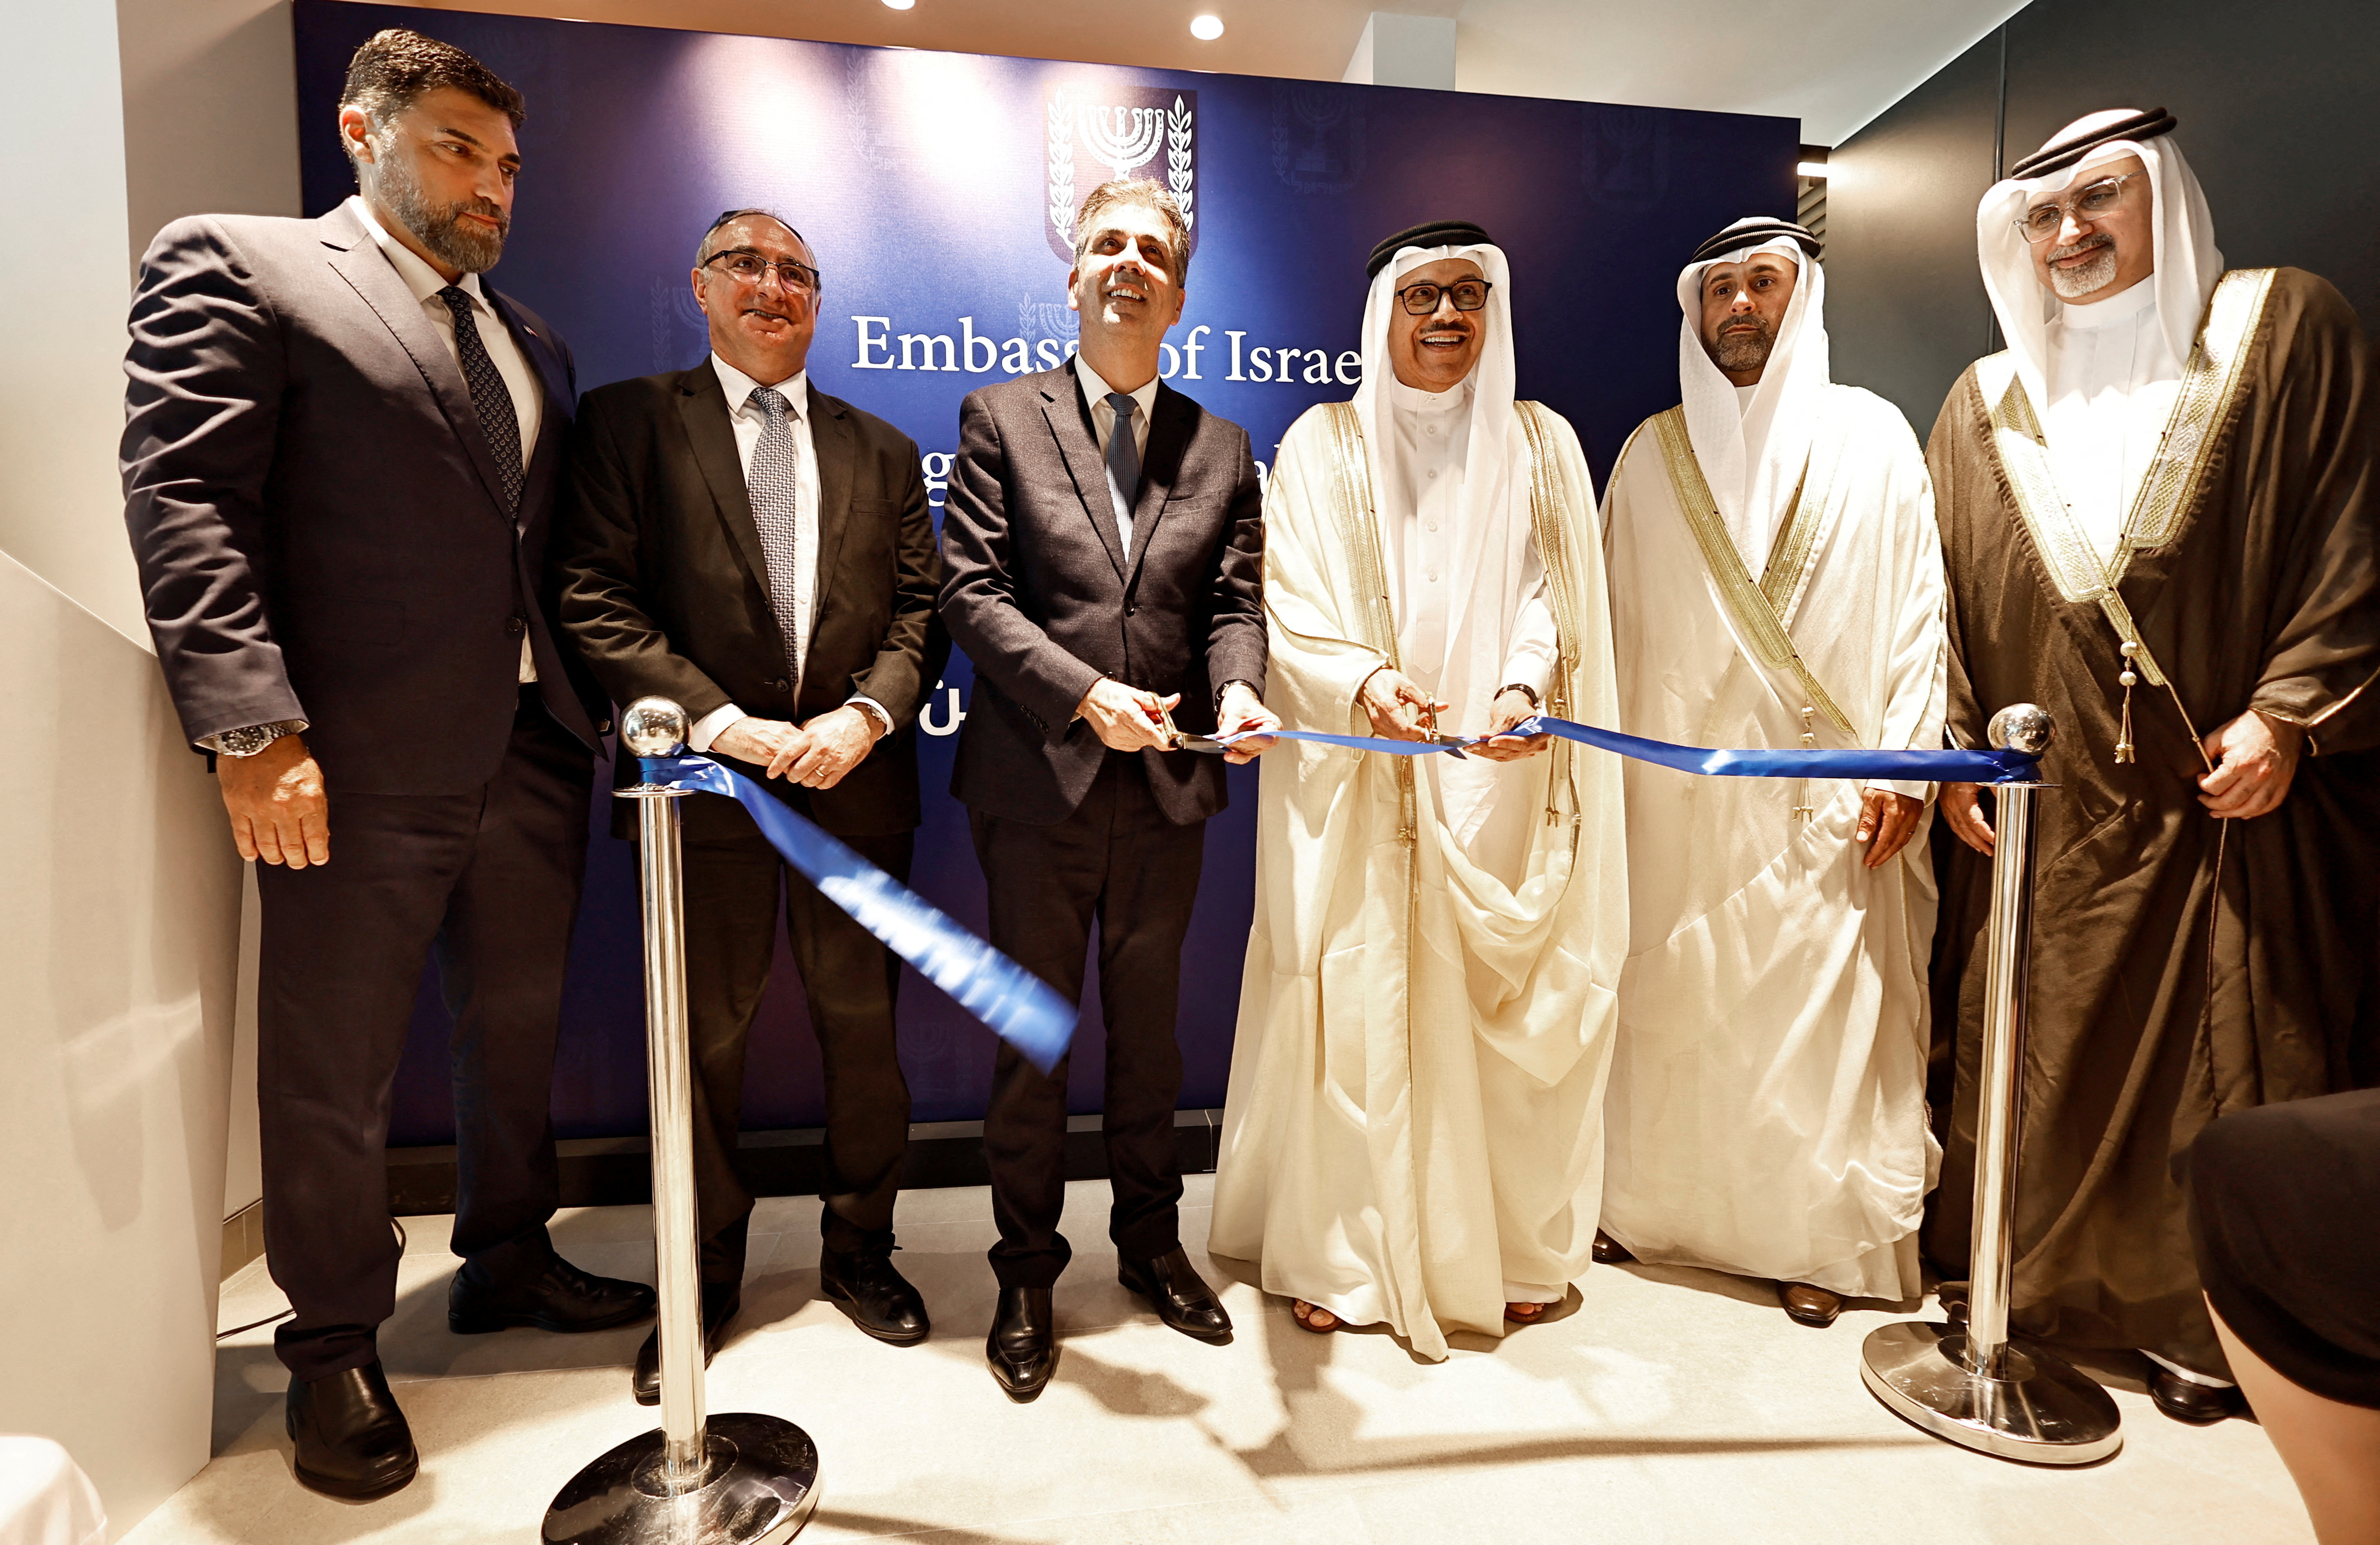 Israel's Foreign Minister Eli Cohen and Bahrain's Foreign Minister Abdullatif bin Rashid Alzayani officially inaugurate the Israeli Embassy in Manama